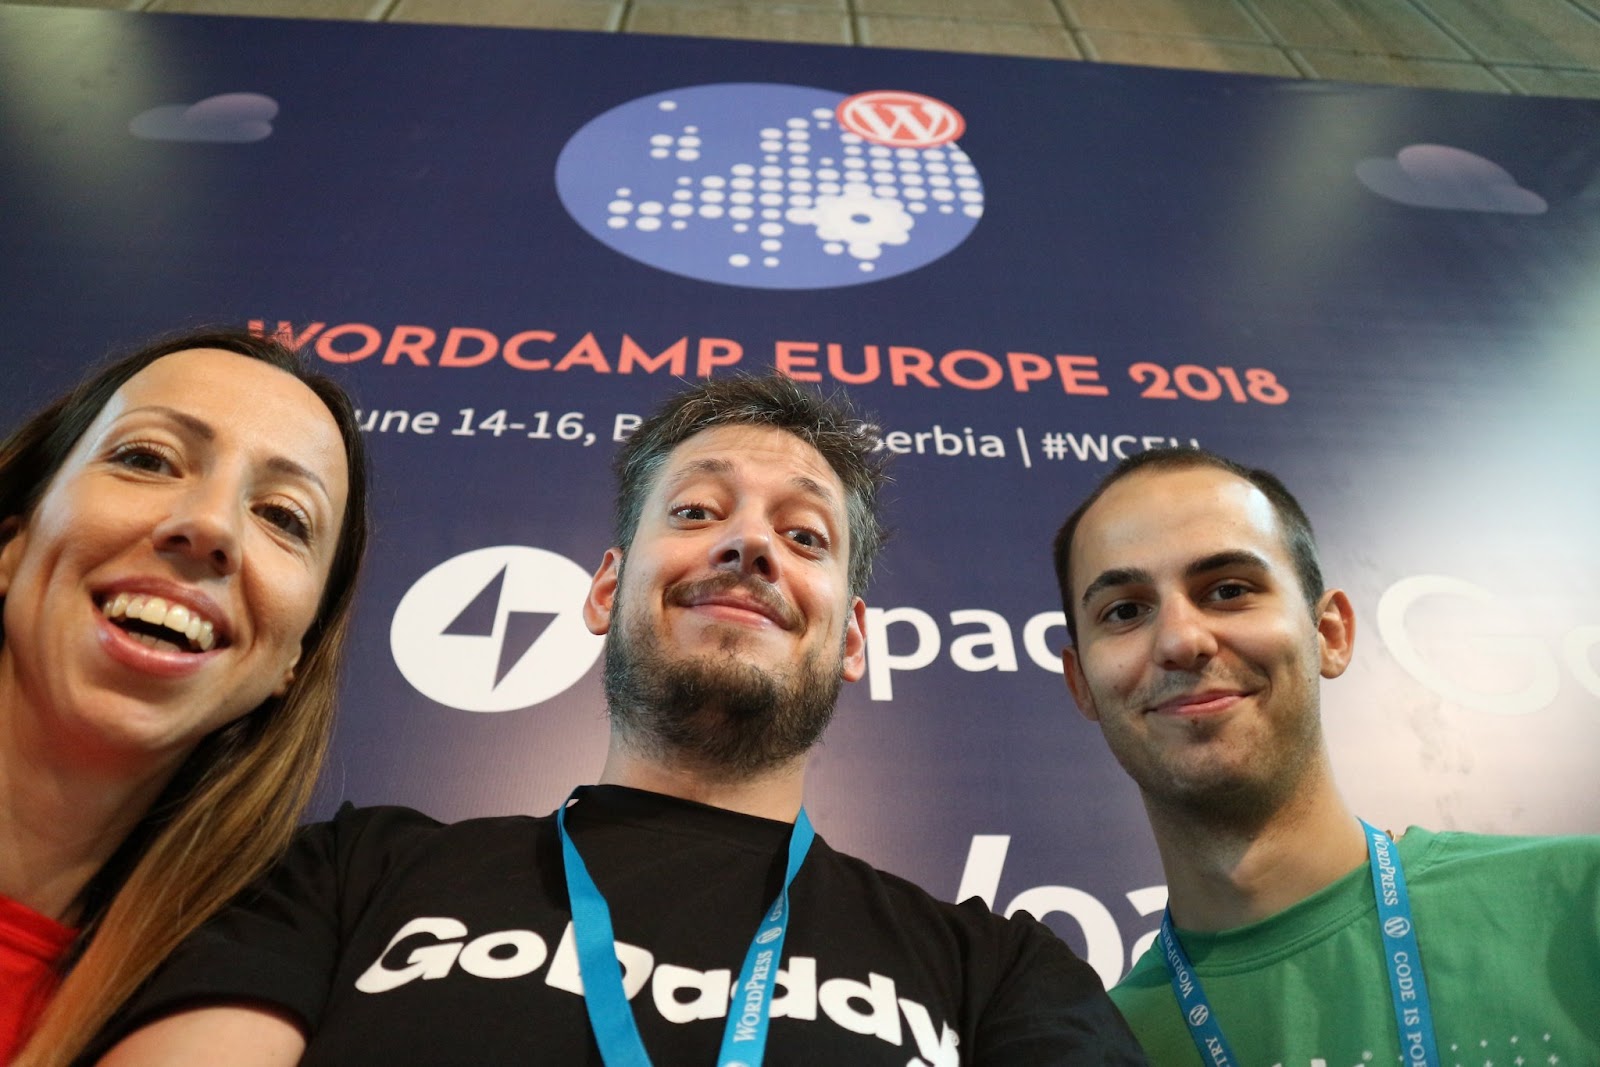 WordCamp Europe 2019 group picture